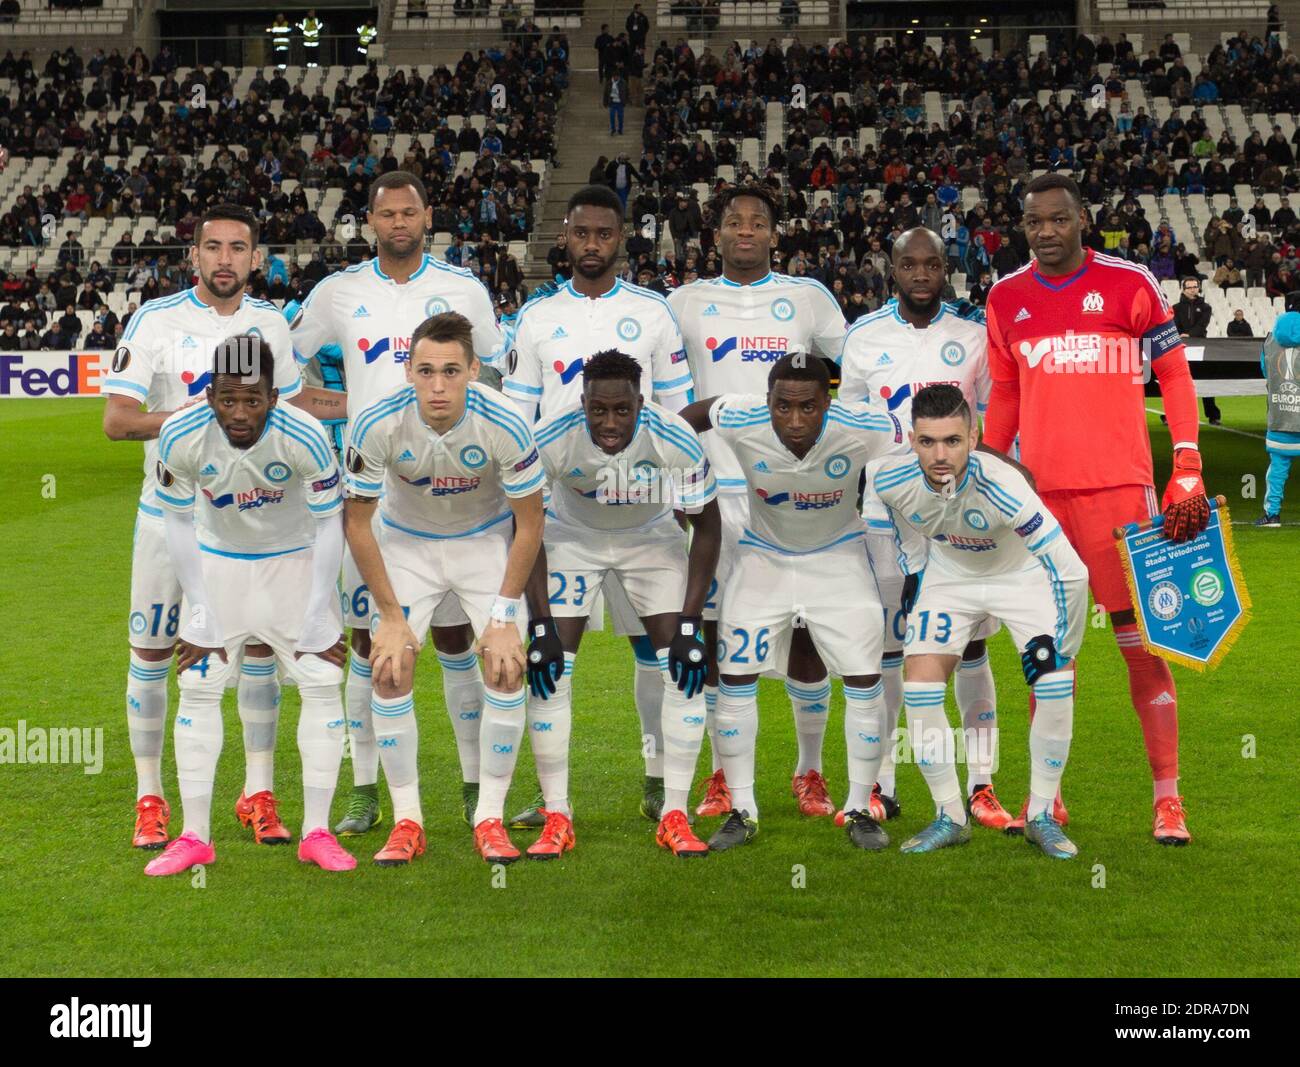 Marseille's team before the UEFA Europa League Group F soccer match, Olympique de Marseille Vs FC Groningen at Stade Vélodrome in Marseille, France on November 27th, 2015. Photo by Guillaume Chagnard/ABACAPRESS.COM Stock Photo